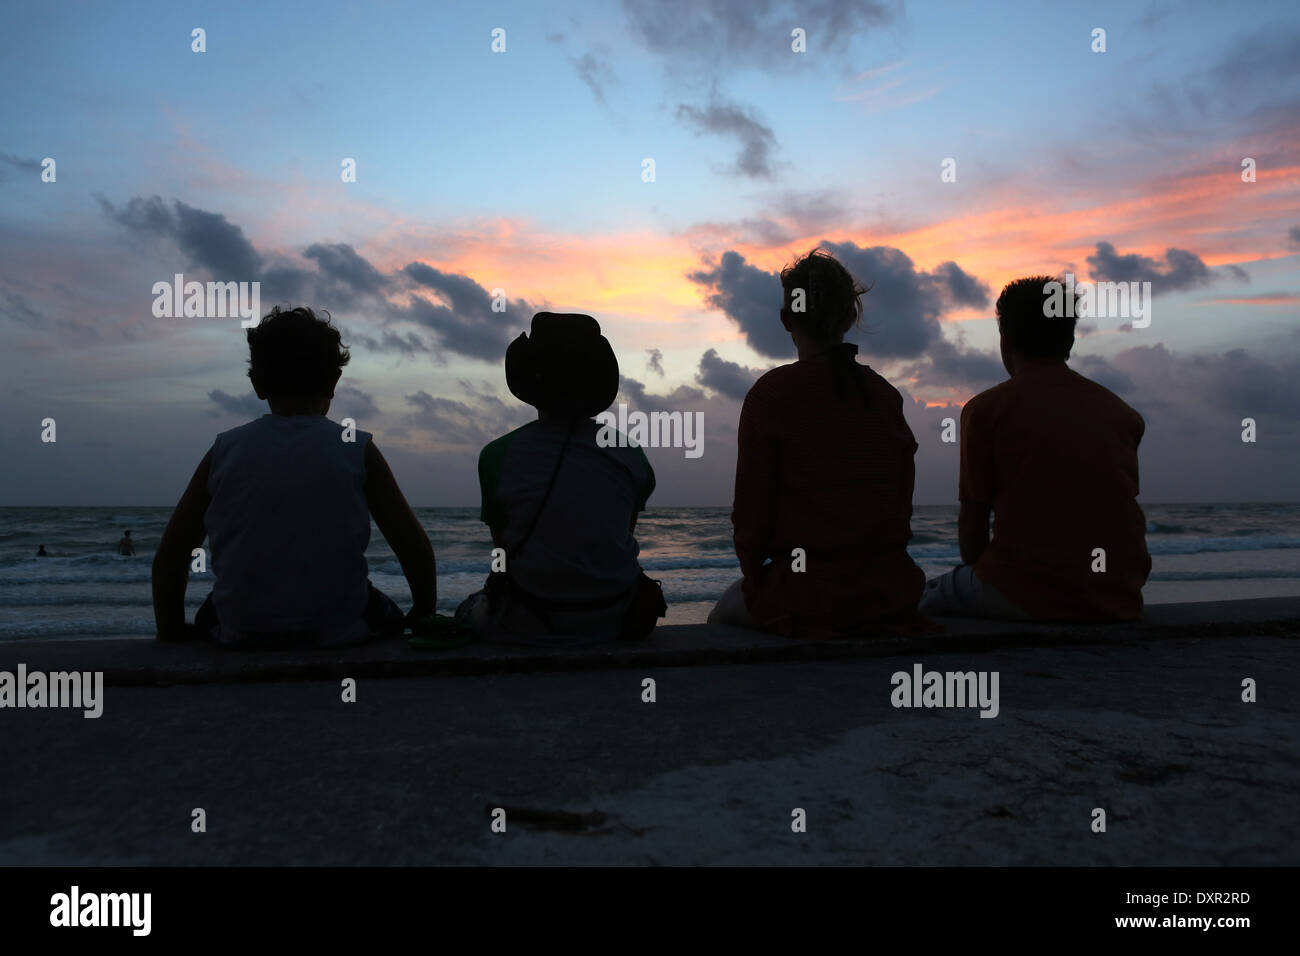 Pass A Grille, United States of America, Silhouette, Family sitting at dusk on the beach Stock Photo